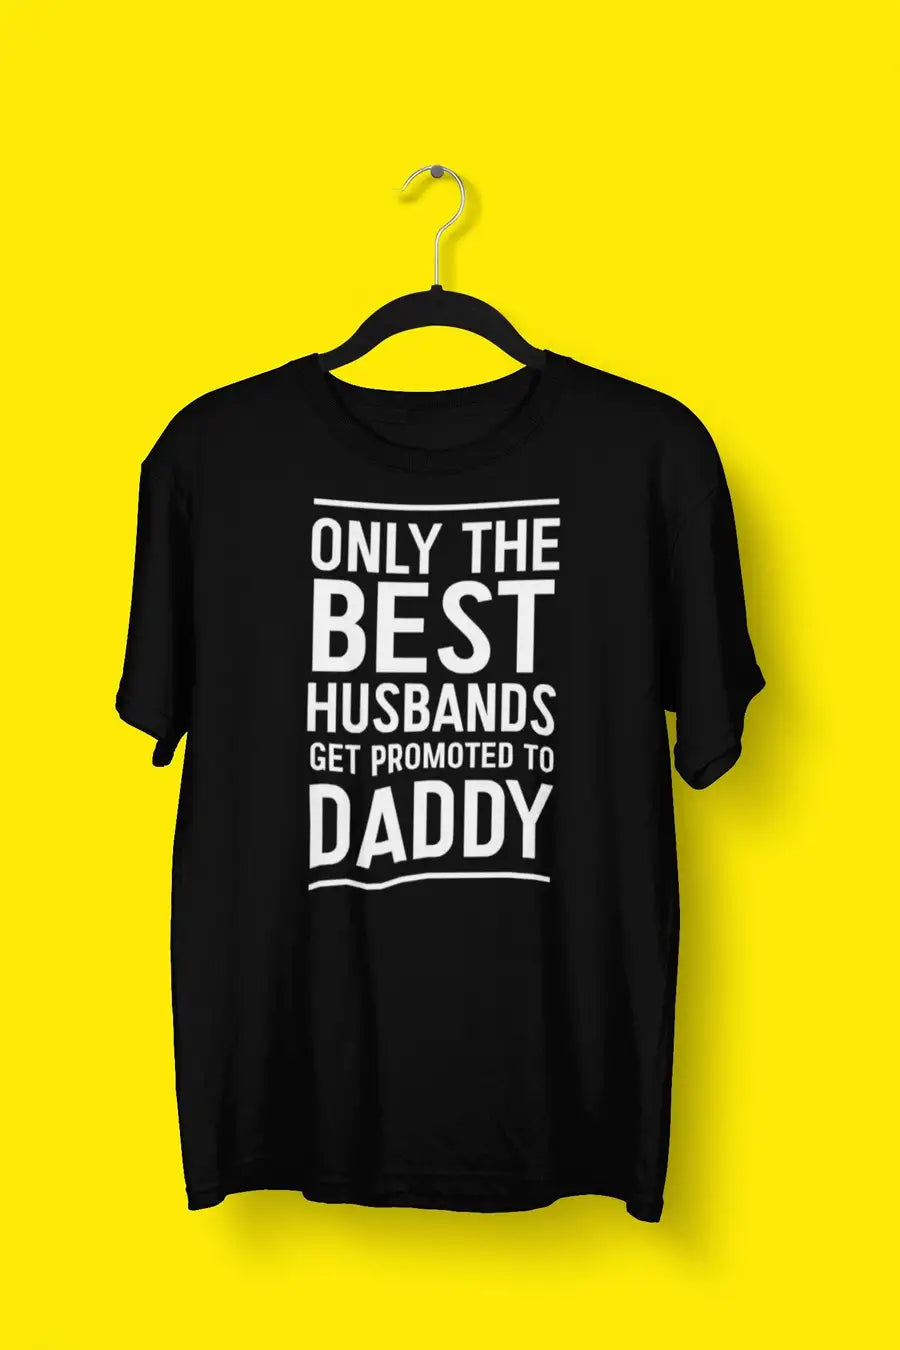 Only the Best Husbands Get Promoted to Daddy T Shirt for Men | Premium Design | Catch My Drift India - Catch My Drift India Clothing black, clothing, dad, father, made in india, parents, shir